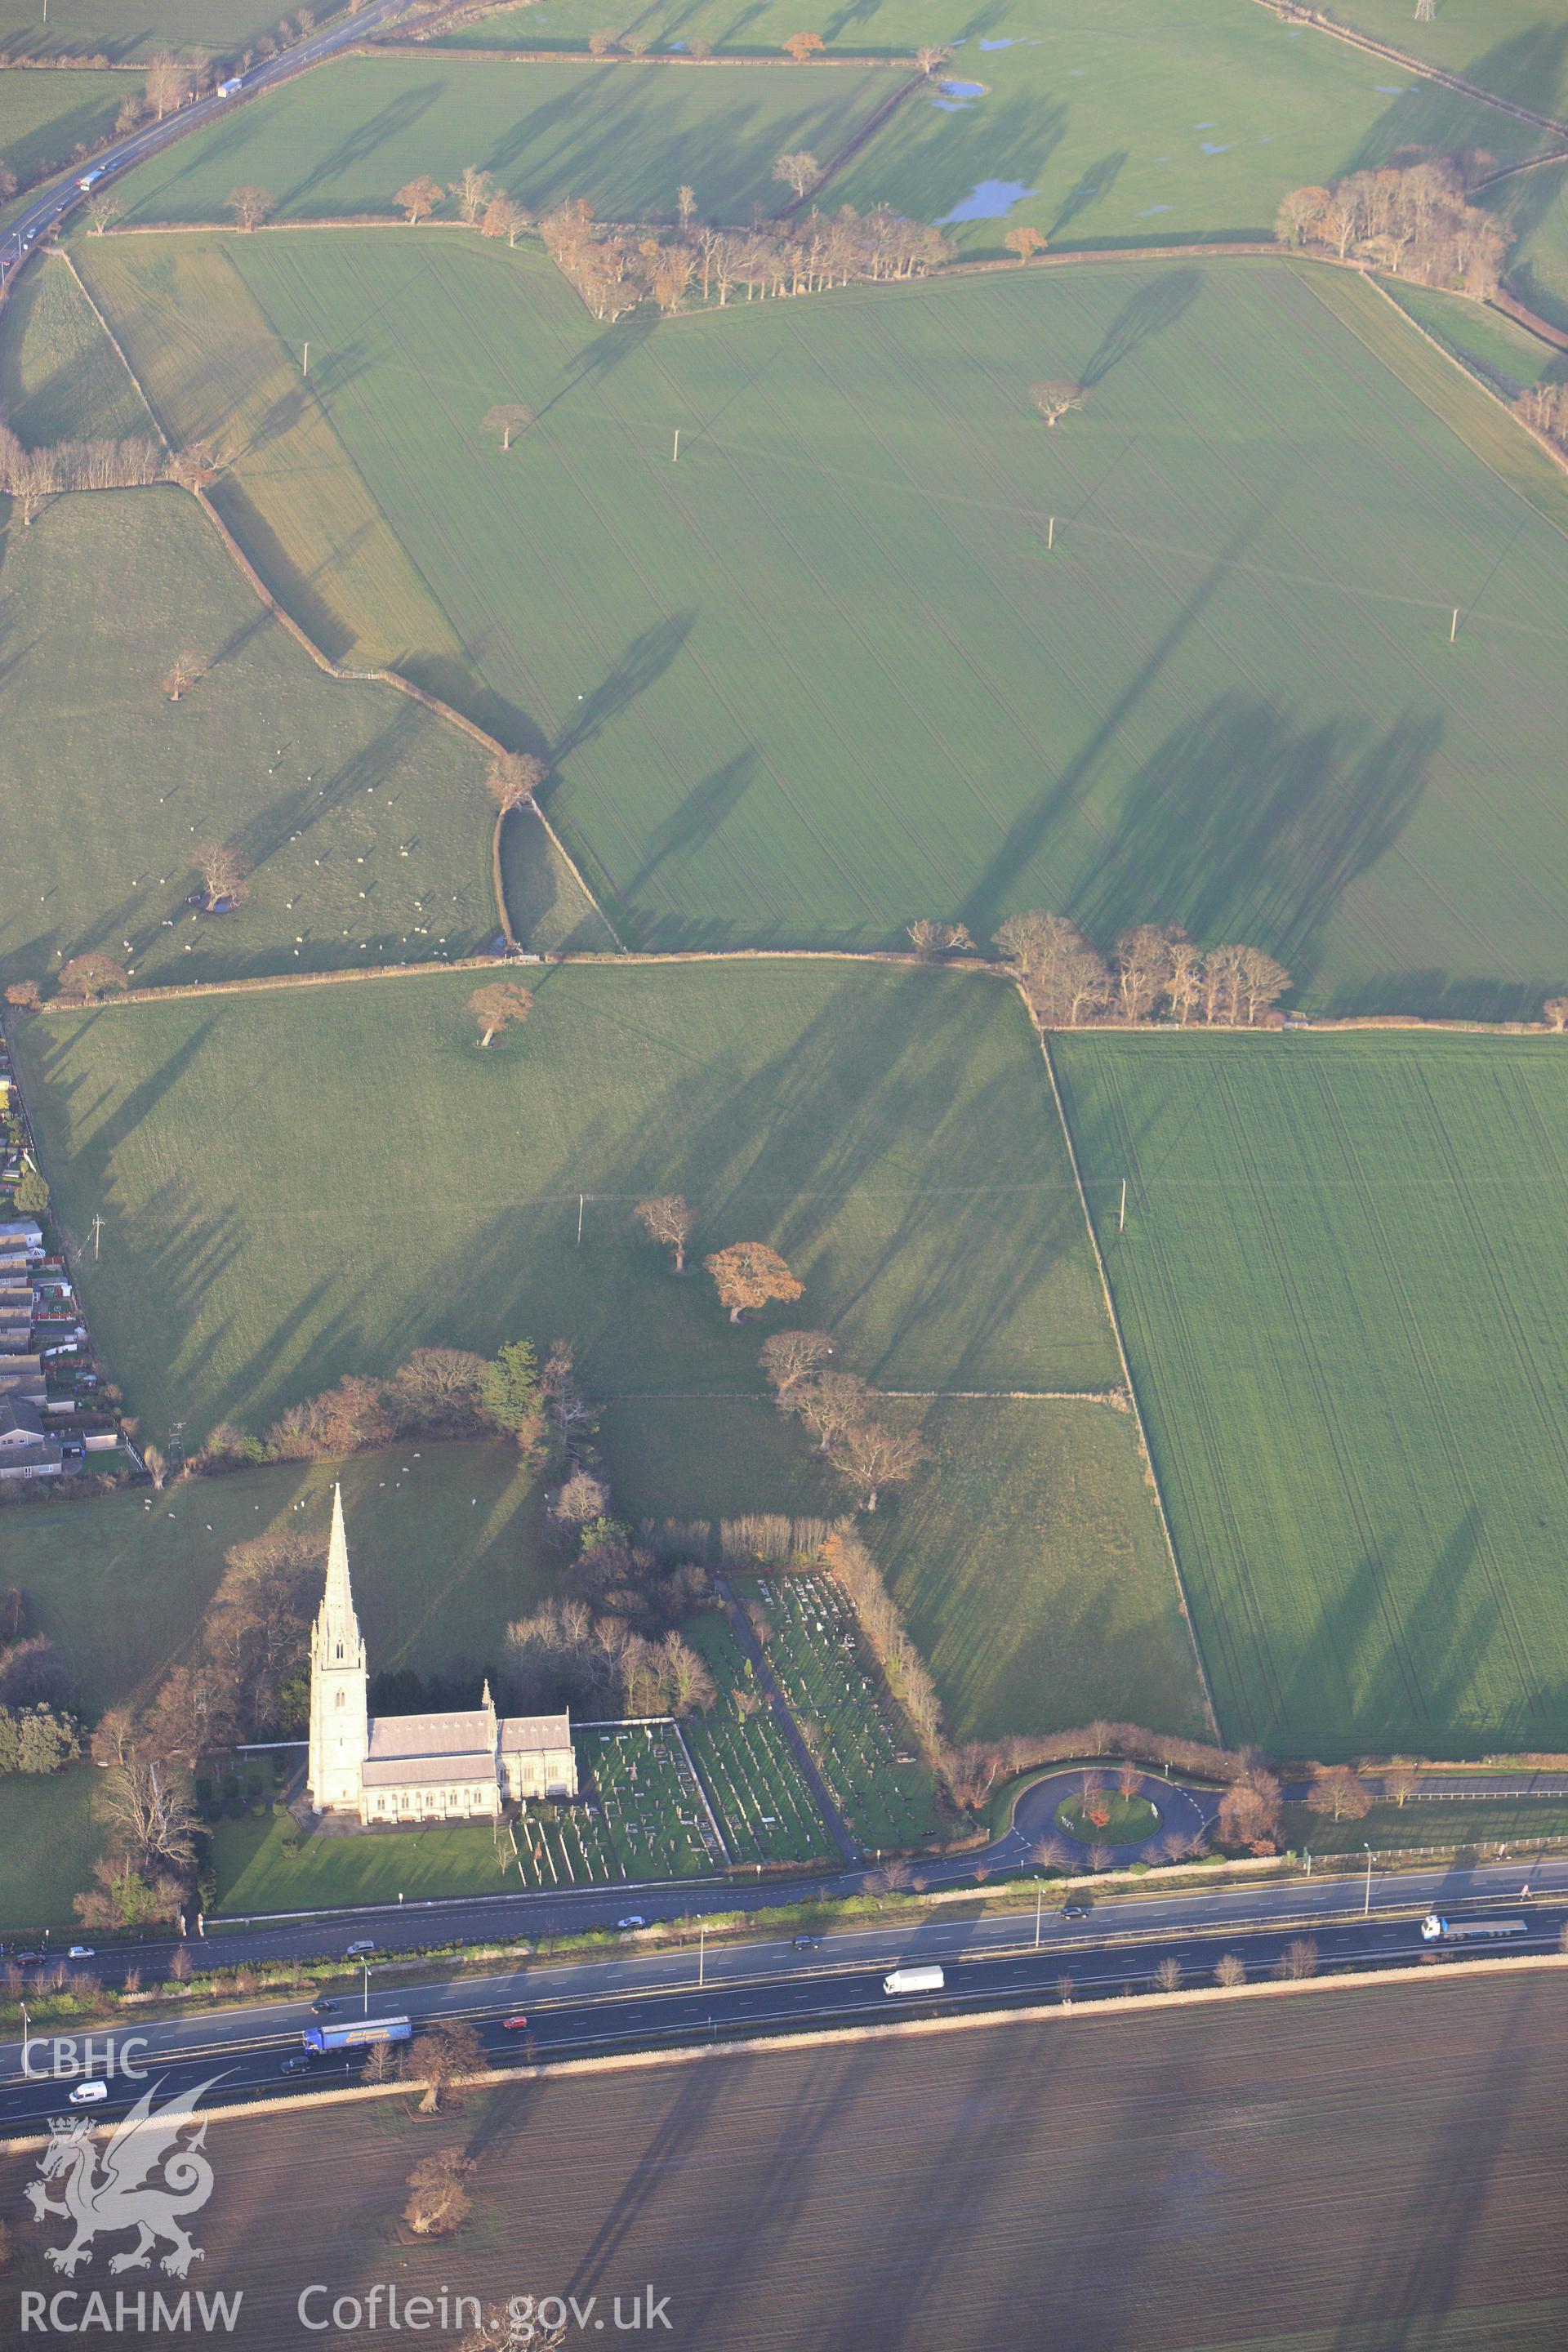 RCAHMW colour oblique aerial photograph of St Margaret's Church (The Marble Church), Bodelwyddan. Taken on 10 December 2009 by Toby Driver